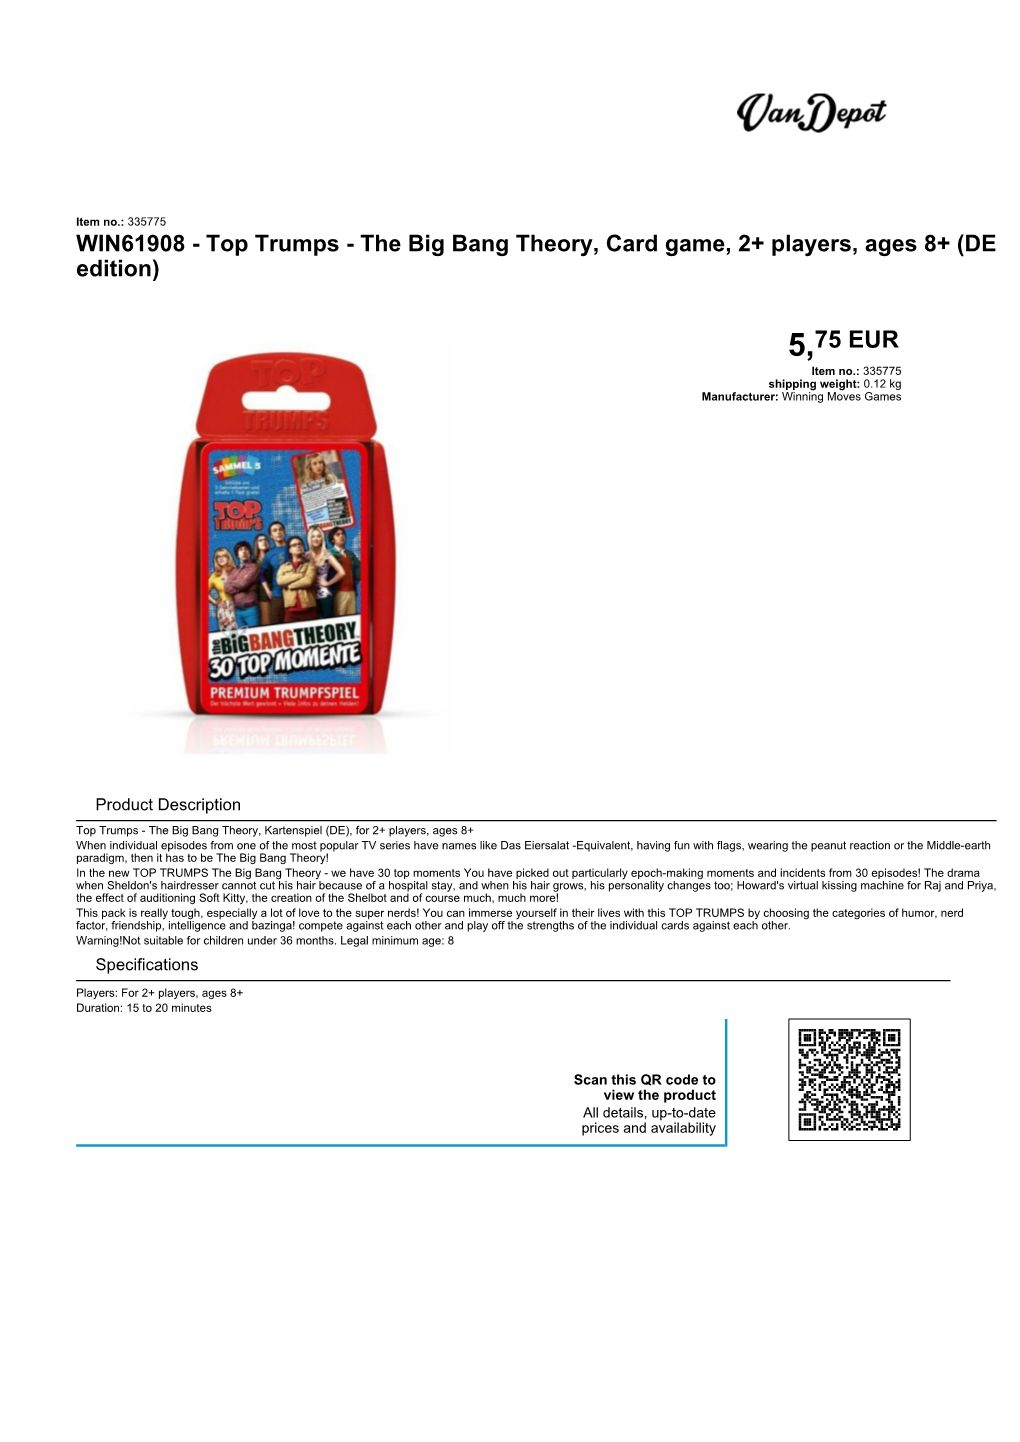 The Big Bang Theory, Card Game, 2+ Players, Ages 8+ (DE Edition)